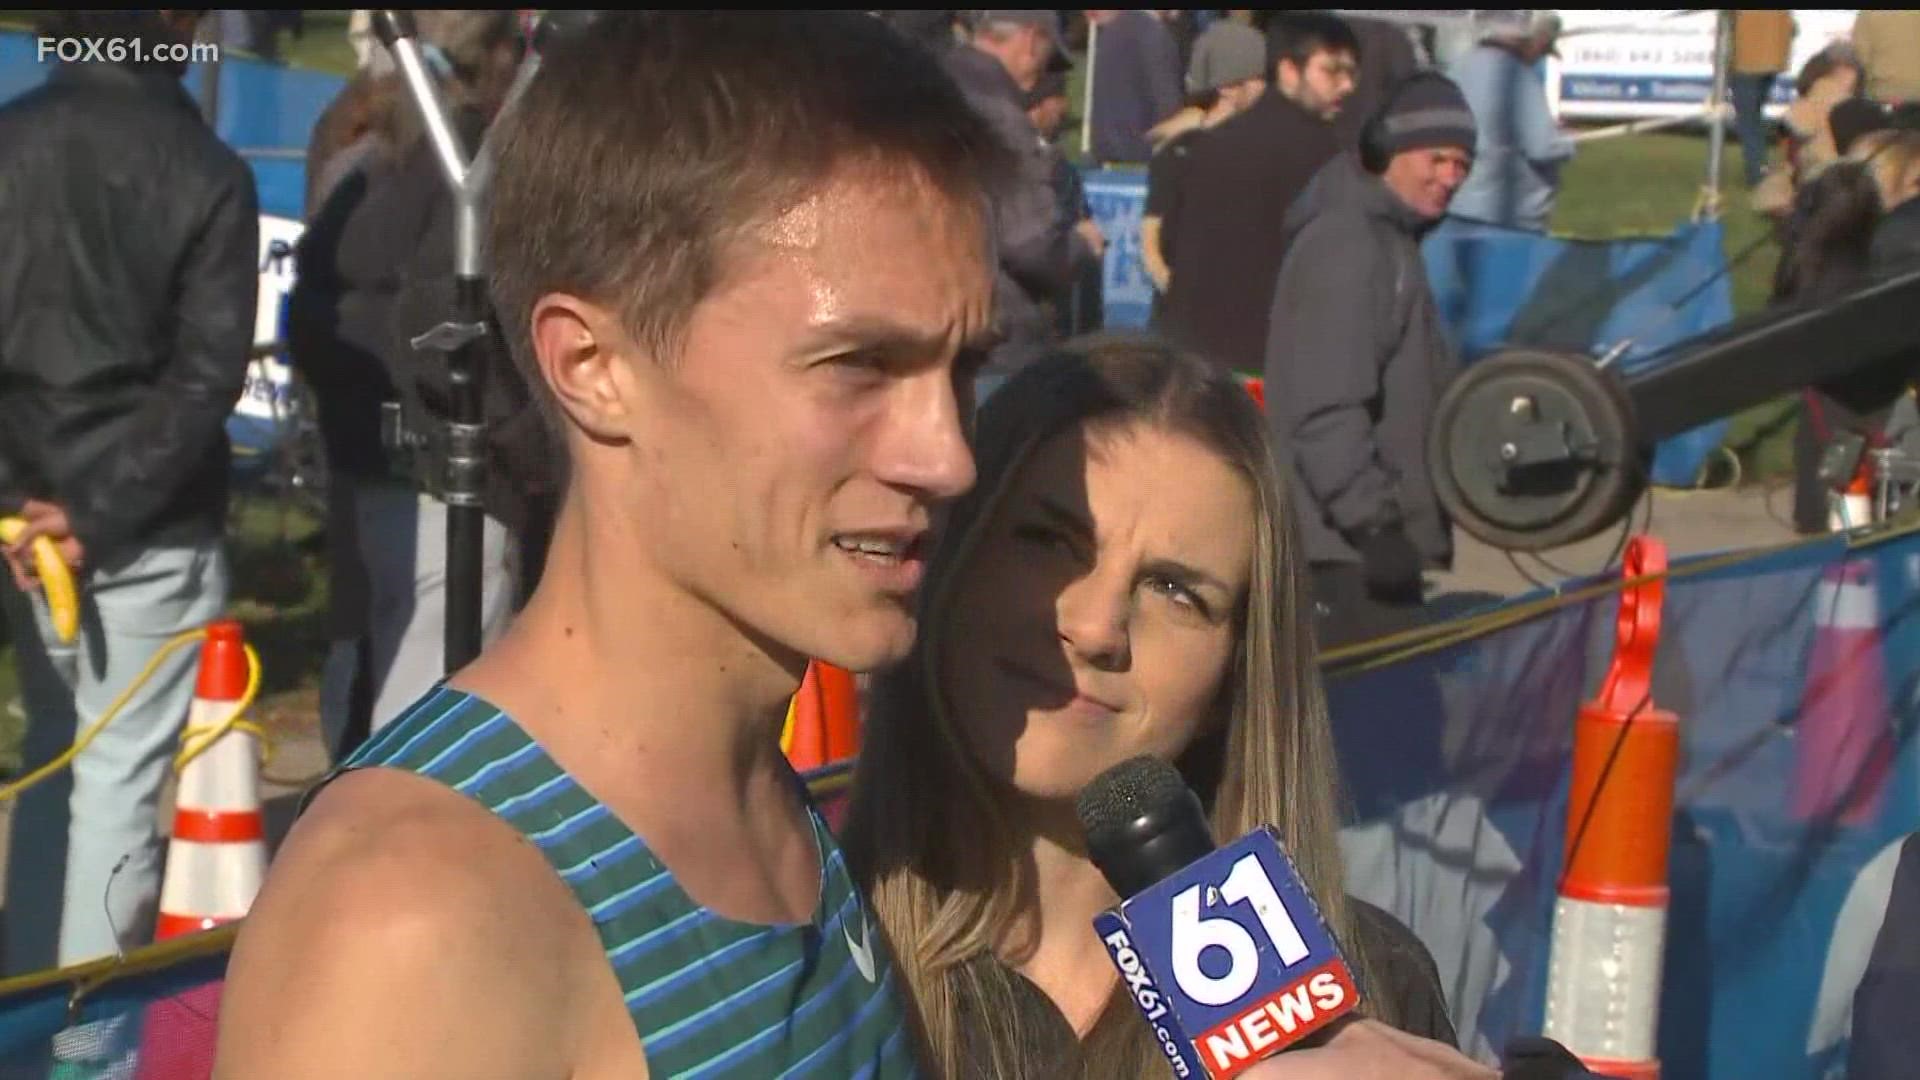 Connor Mantz won the Manchester Road Race in record time. The 25-year-old from Provo, Utah won the race with a time of 21:04.